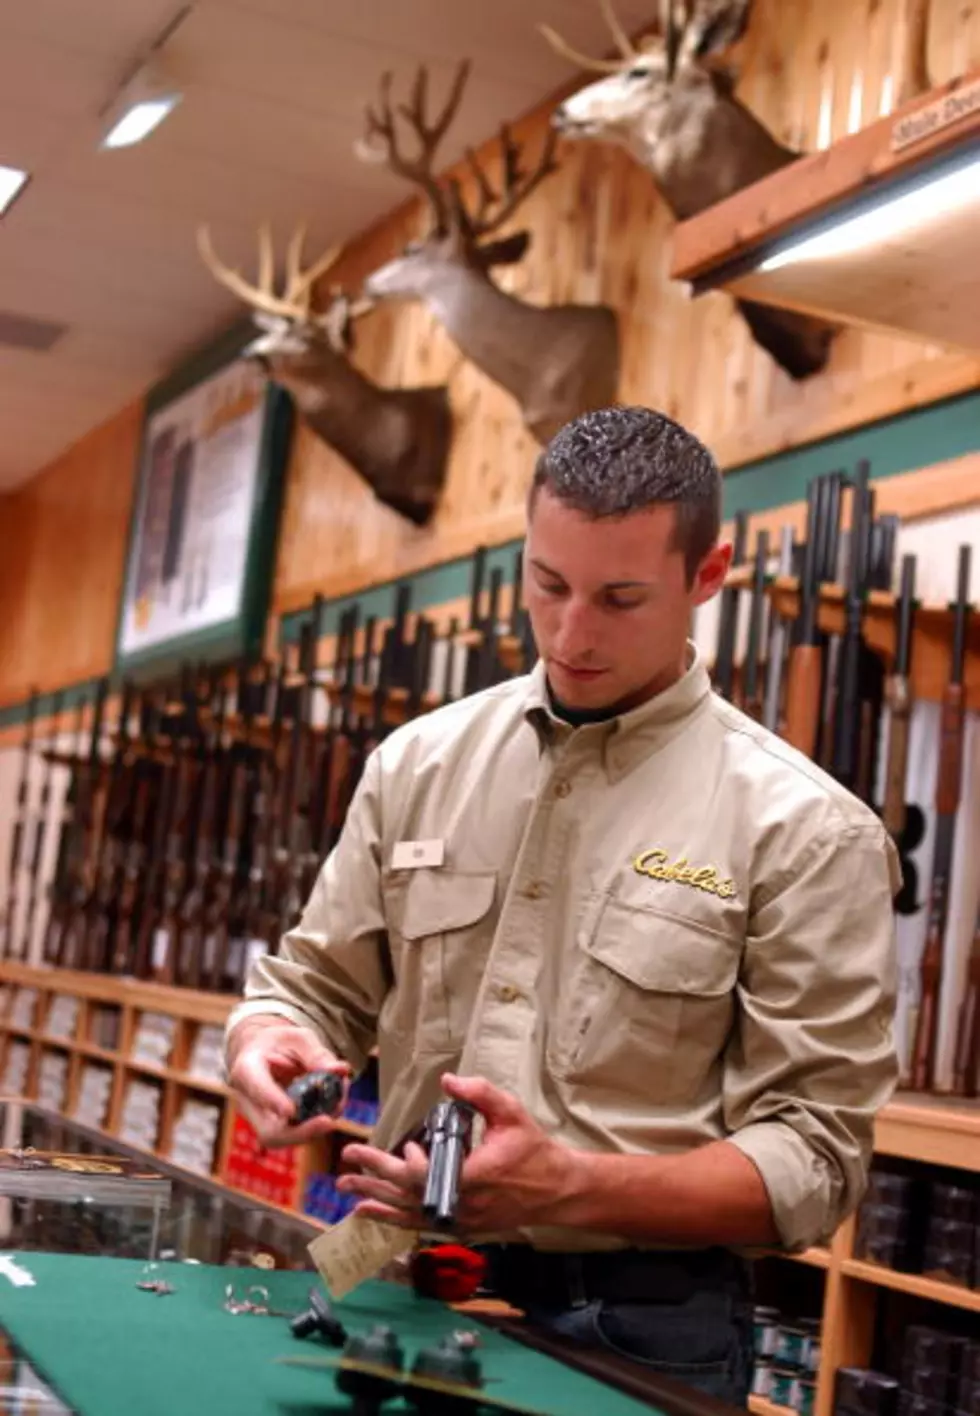 Union Gap Ready For Cabela’s Outpost